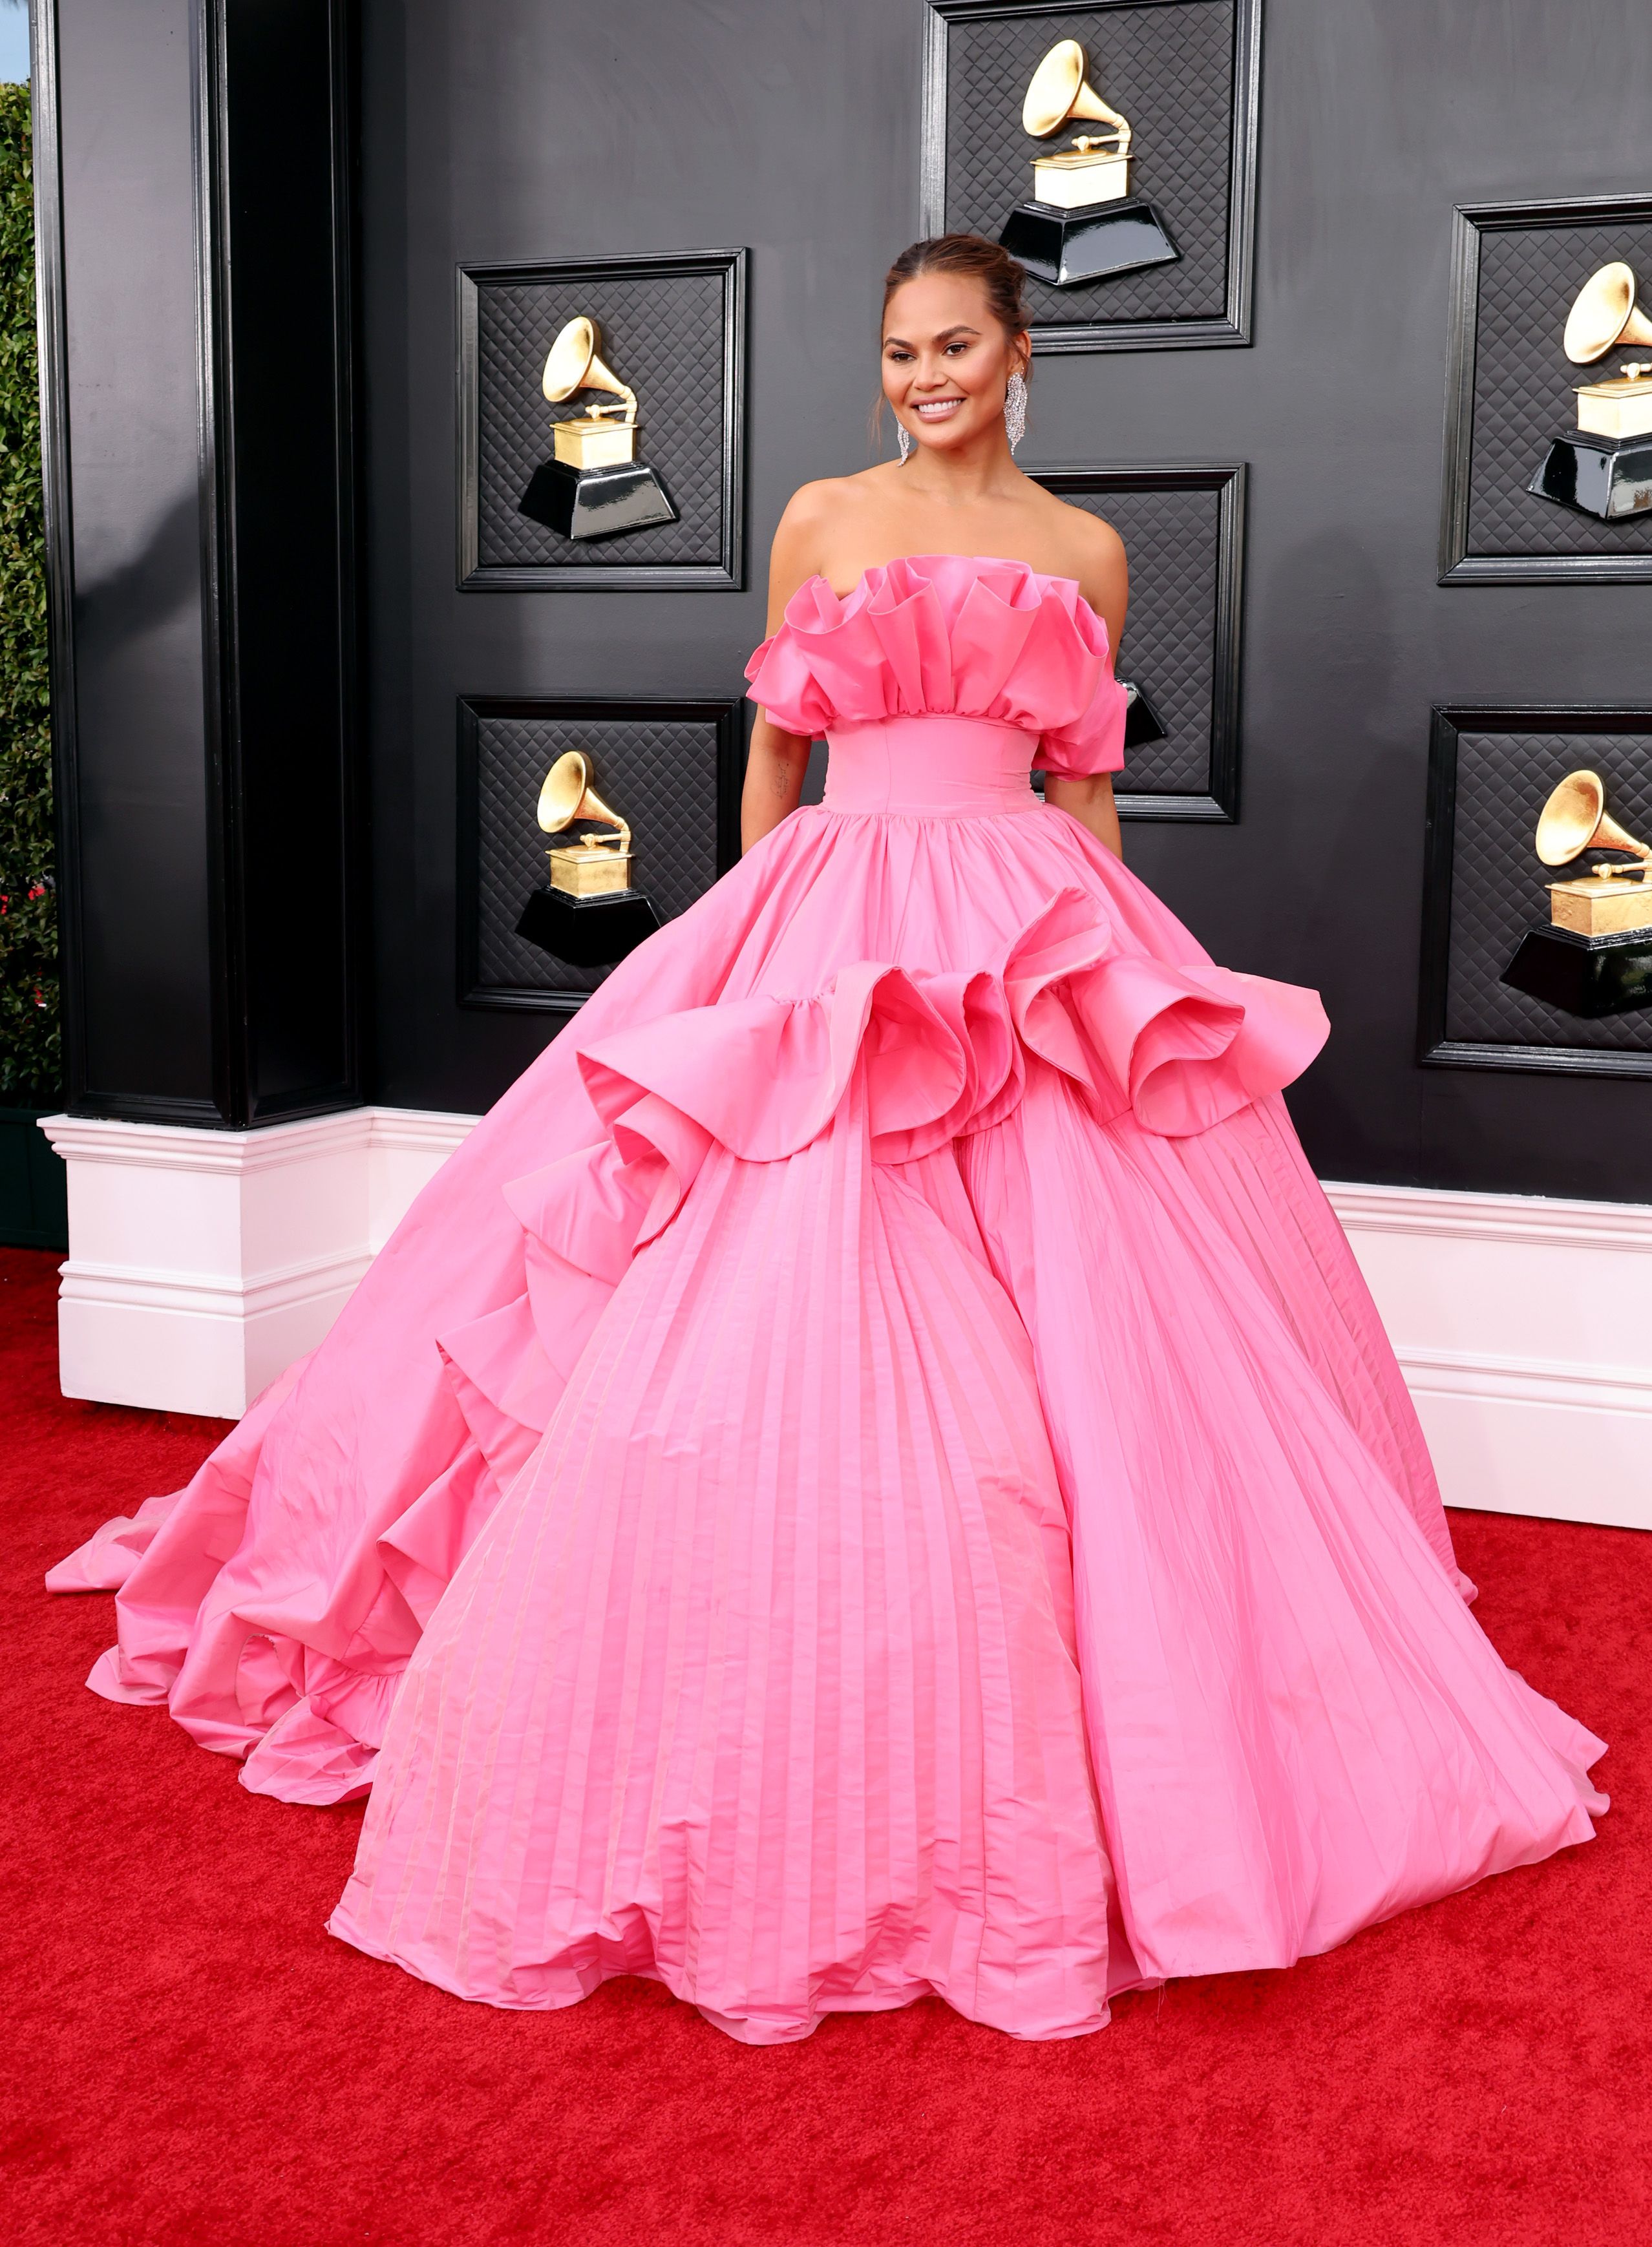 Grammys 2022 Red Carpet: All the Celebrity Dresses, Outfits, and Looks —  See Photos